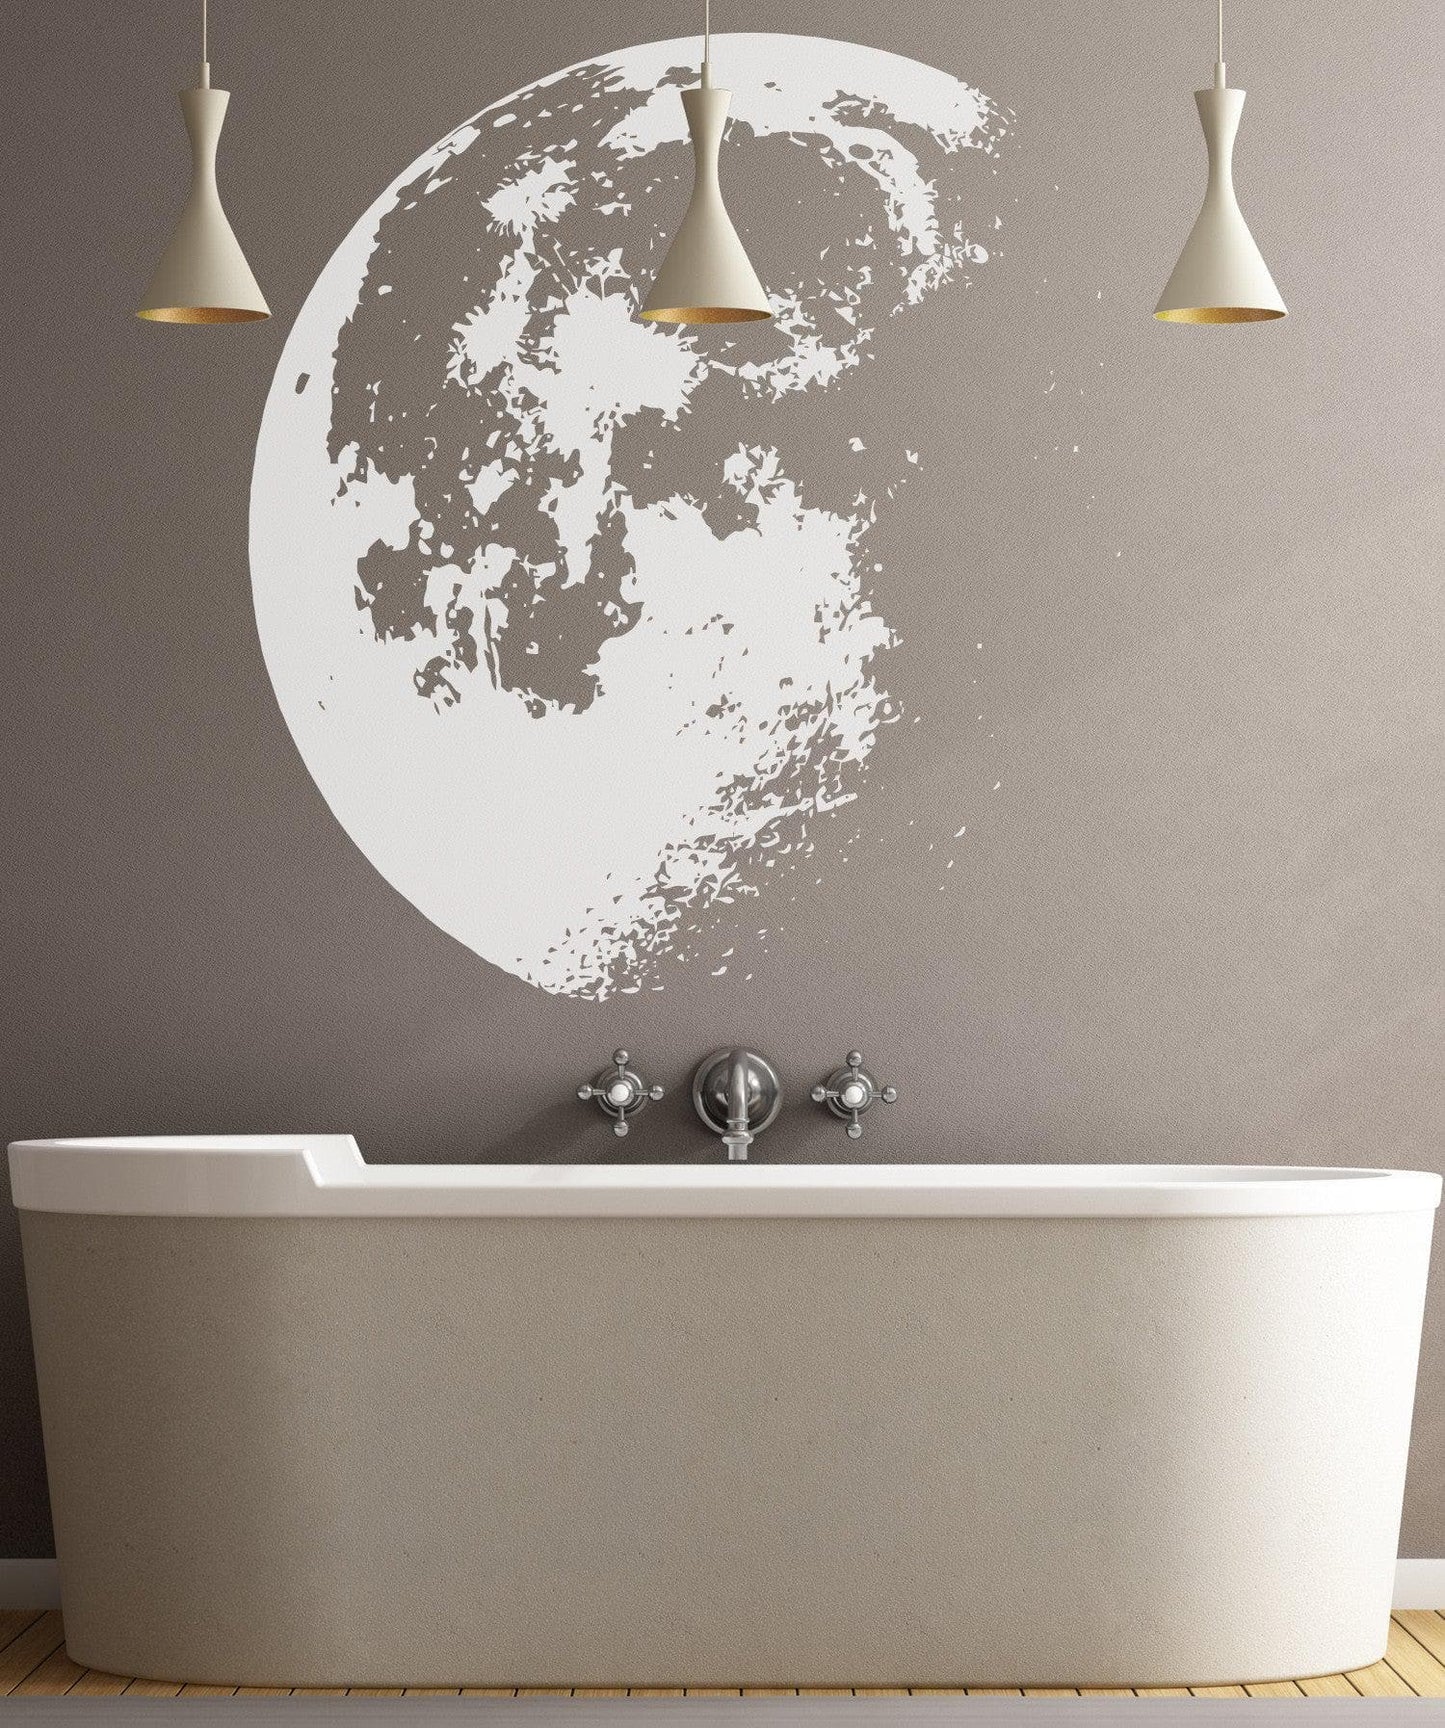 WhiWhite moon decal on a grey wall in a bathroom. 